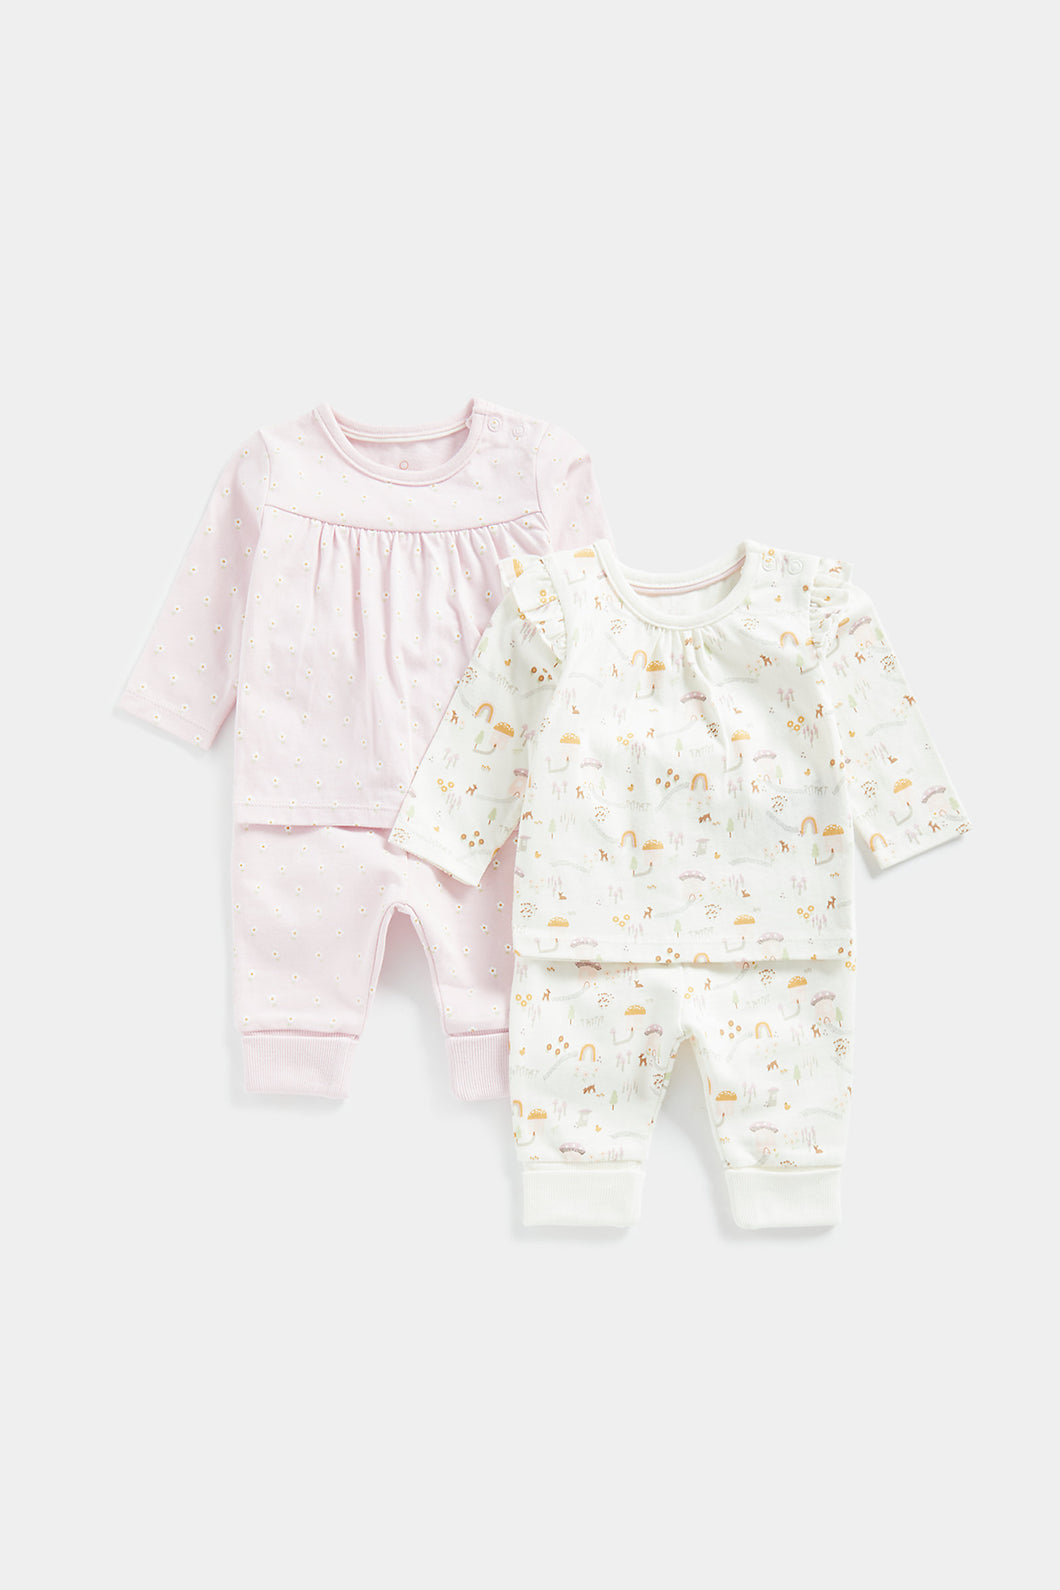 Mothercare Pink and Cream Tops and Joggers - 4 Piece